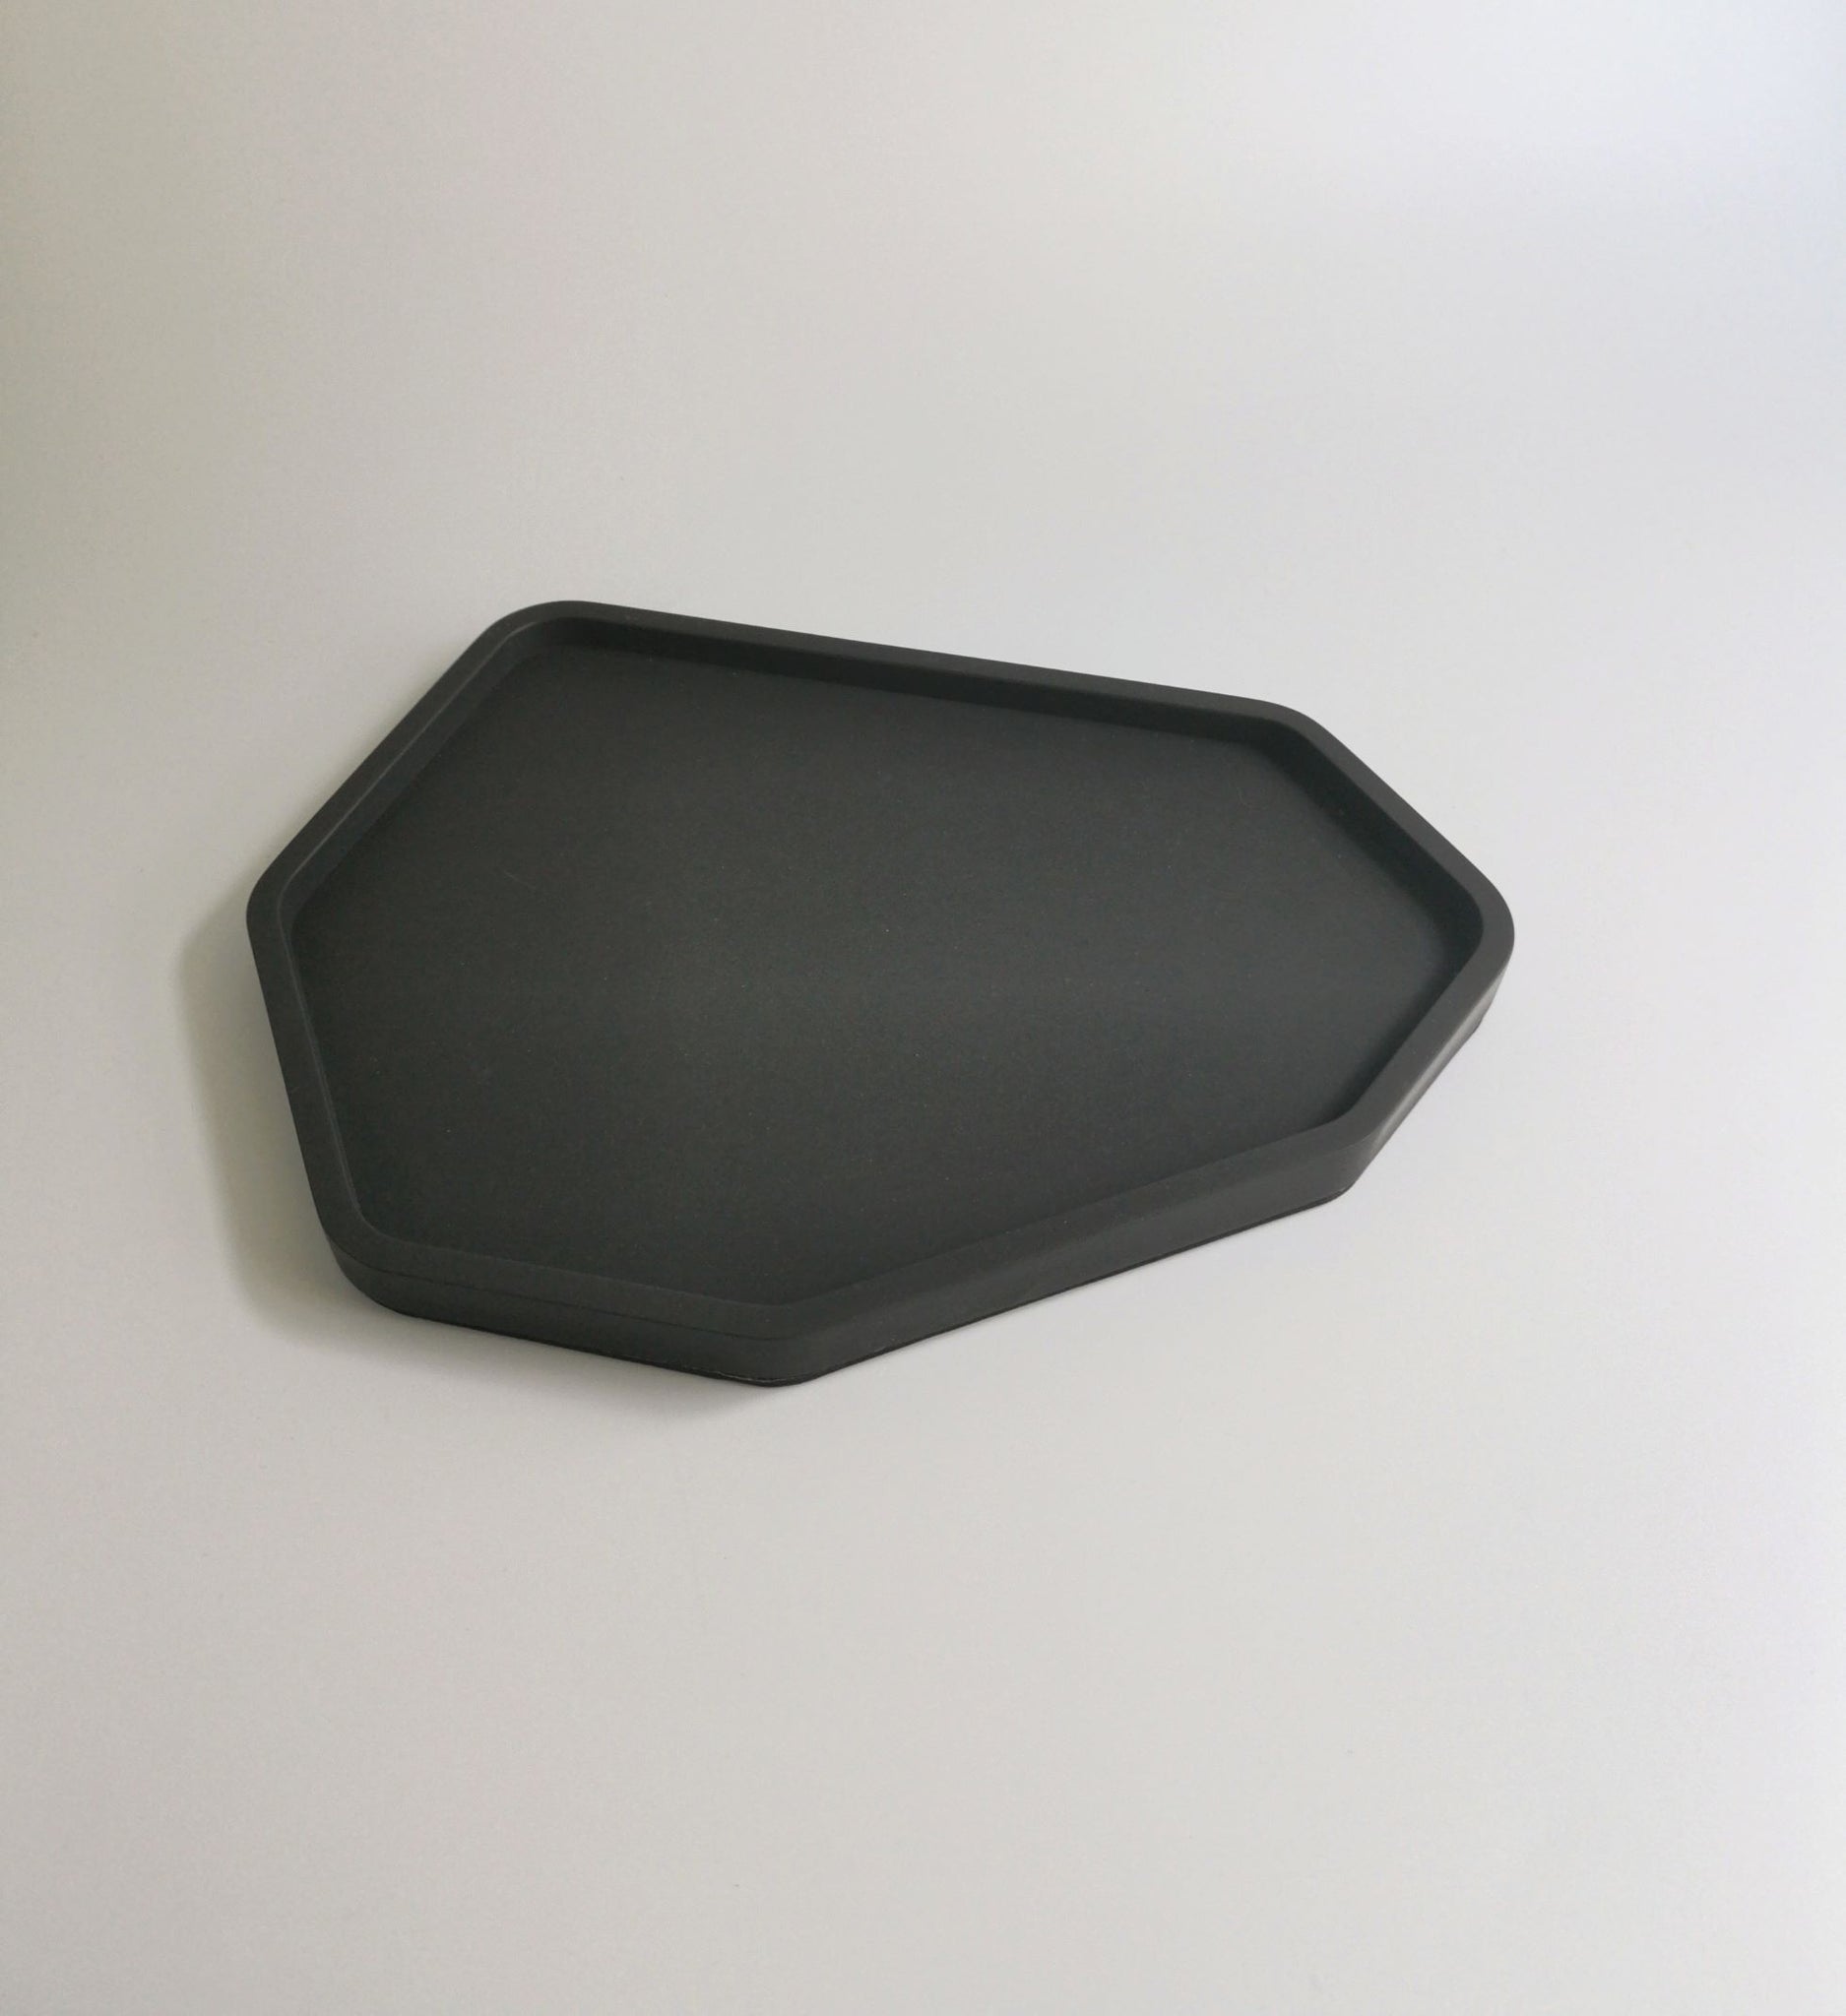 [AS IS] Orion Concrete Tray